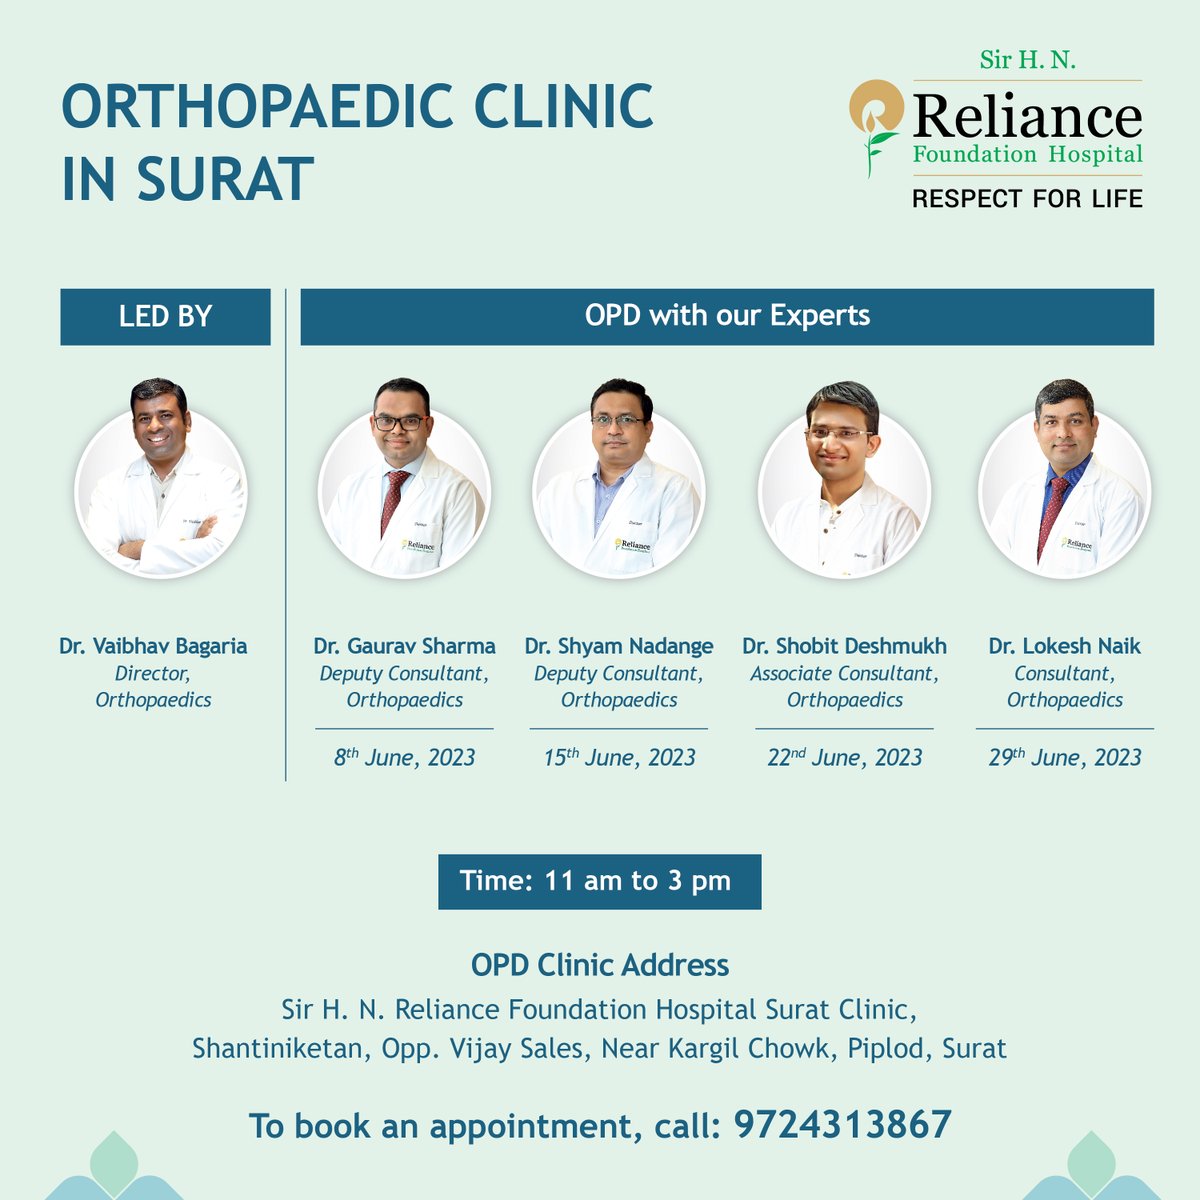 Meet our Experts!

To book an appointment, call 9724313867

#RelianceFoundationHospital #RespectForLife #OrthopaedicClinic #Surat